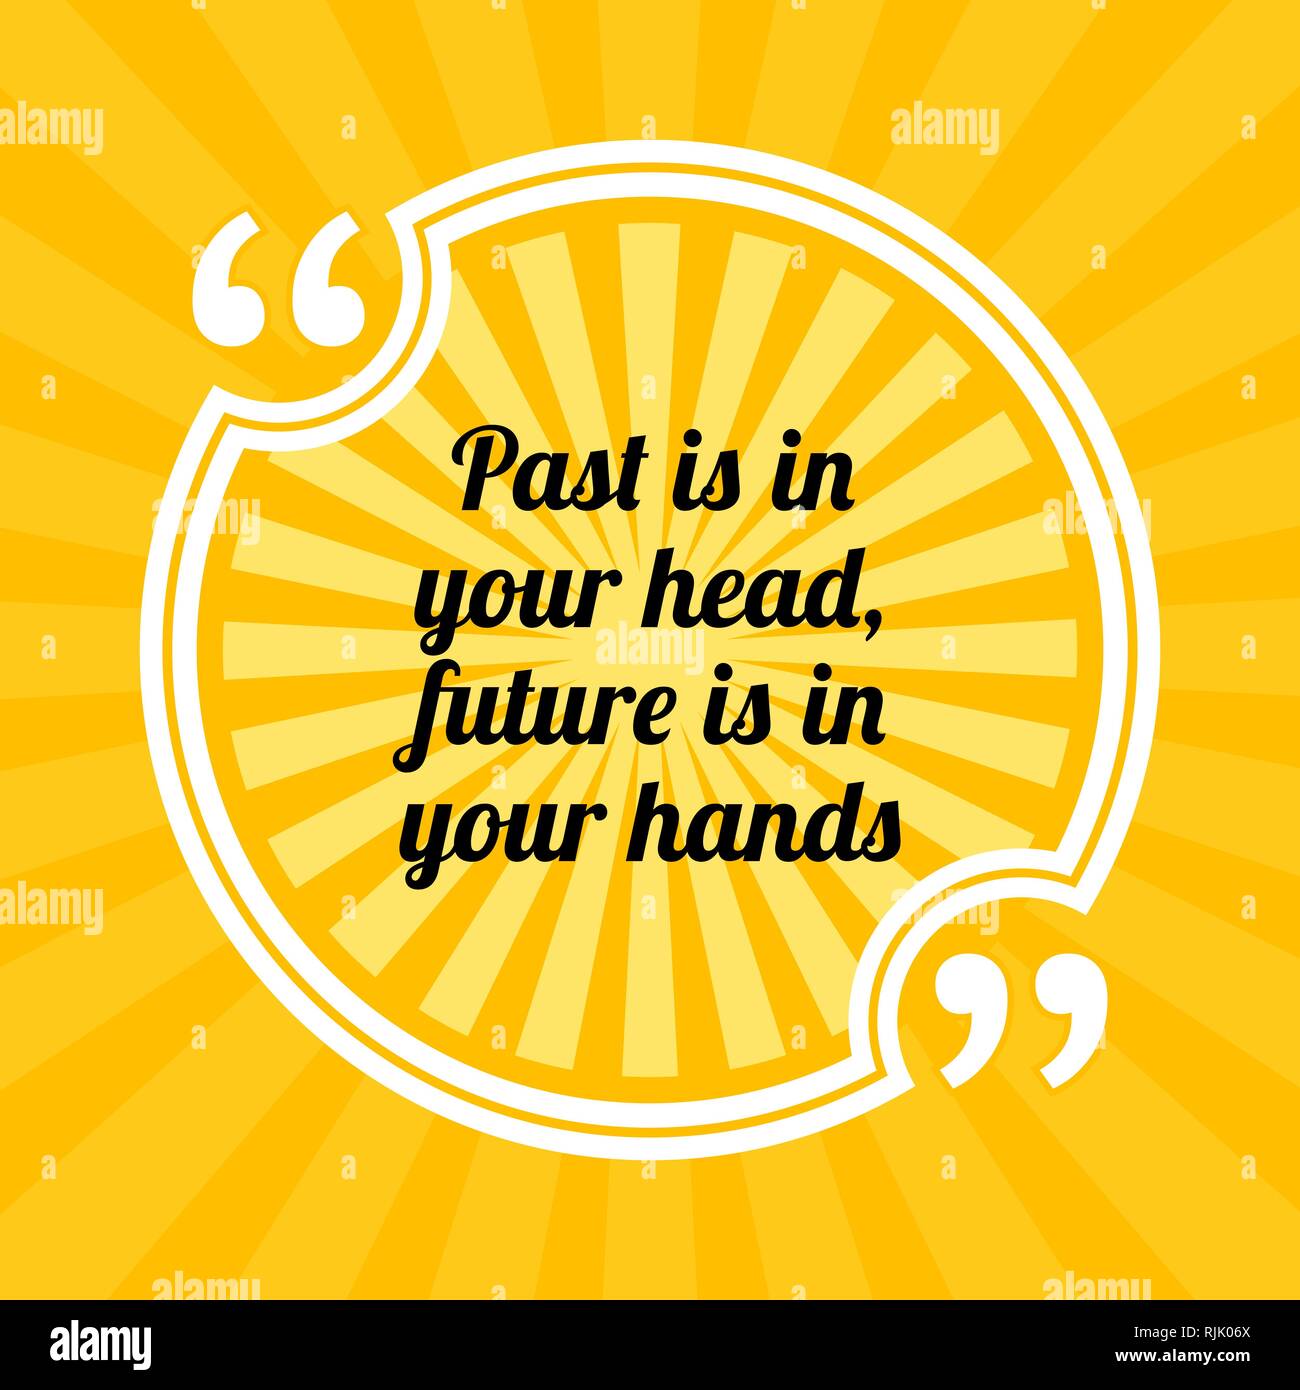 Inspirational motivational quote. Past is in your head, future is in your hands. Sun rays quote symbol on yellow background Stock Vector